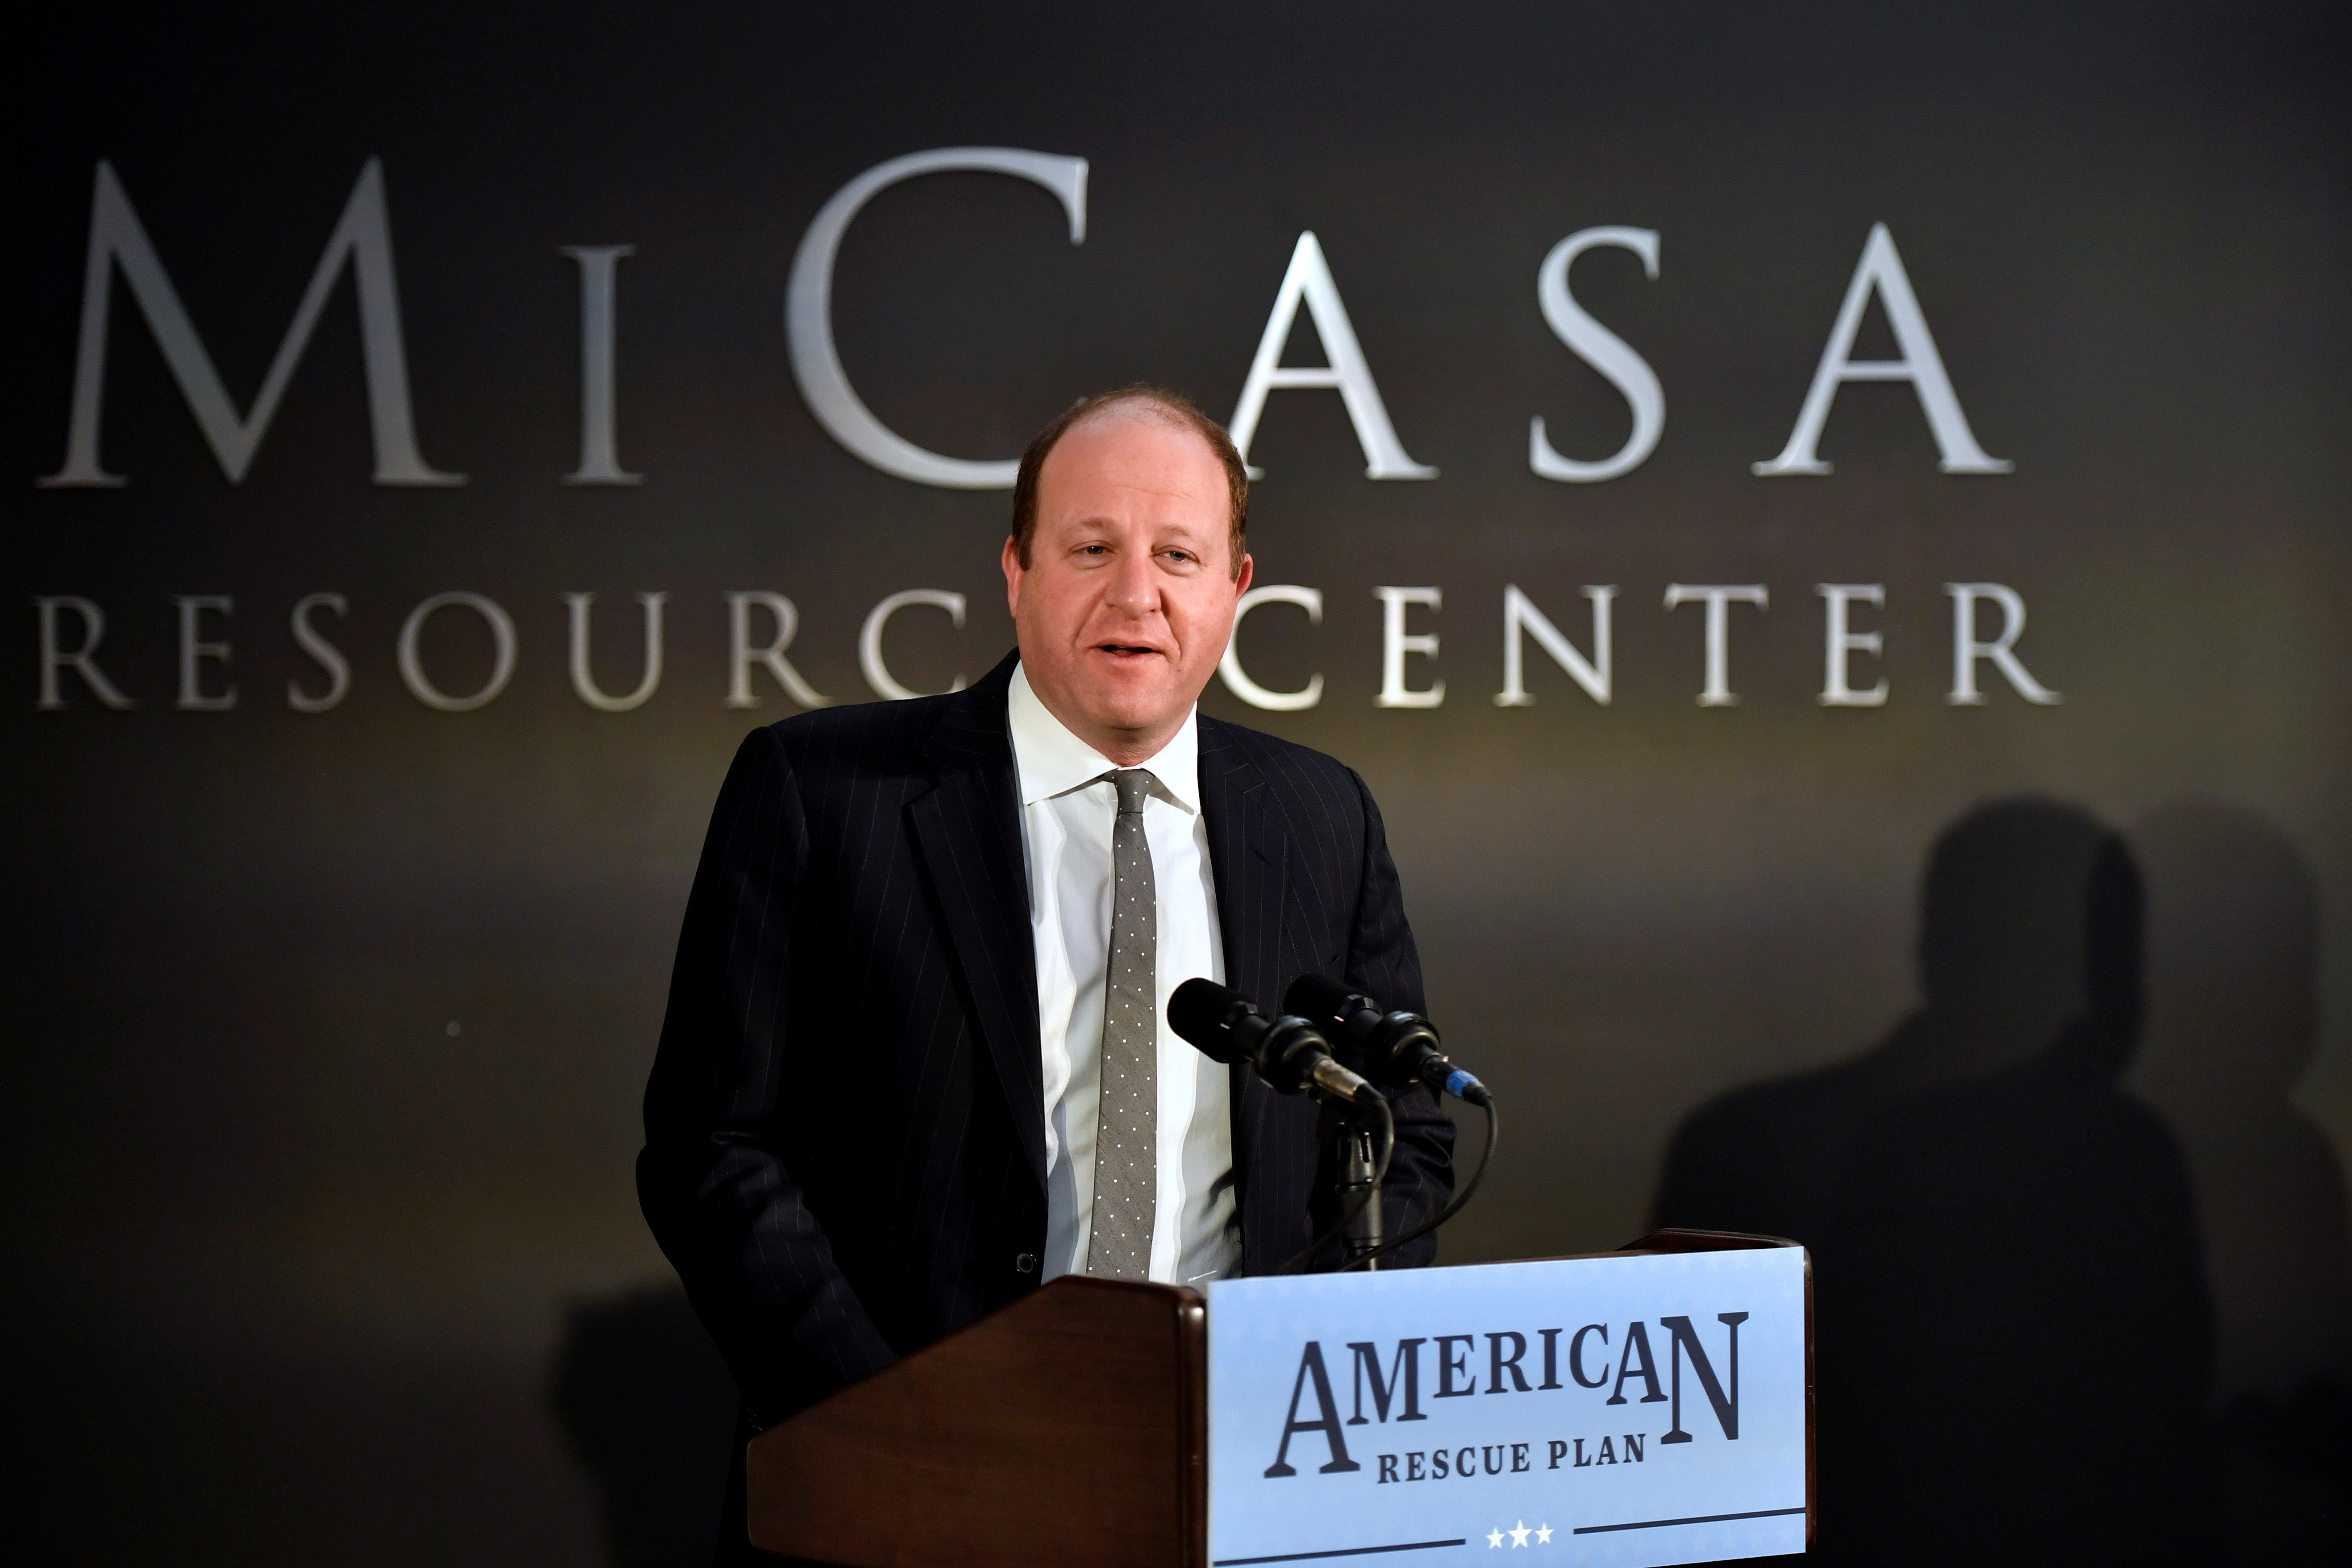 Colorado Governor Jared Polis speaks about the American Rescue Plan Act on the one year anniversary of the law during his visit to Mi Casa Resource Center in Denver